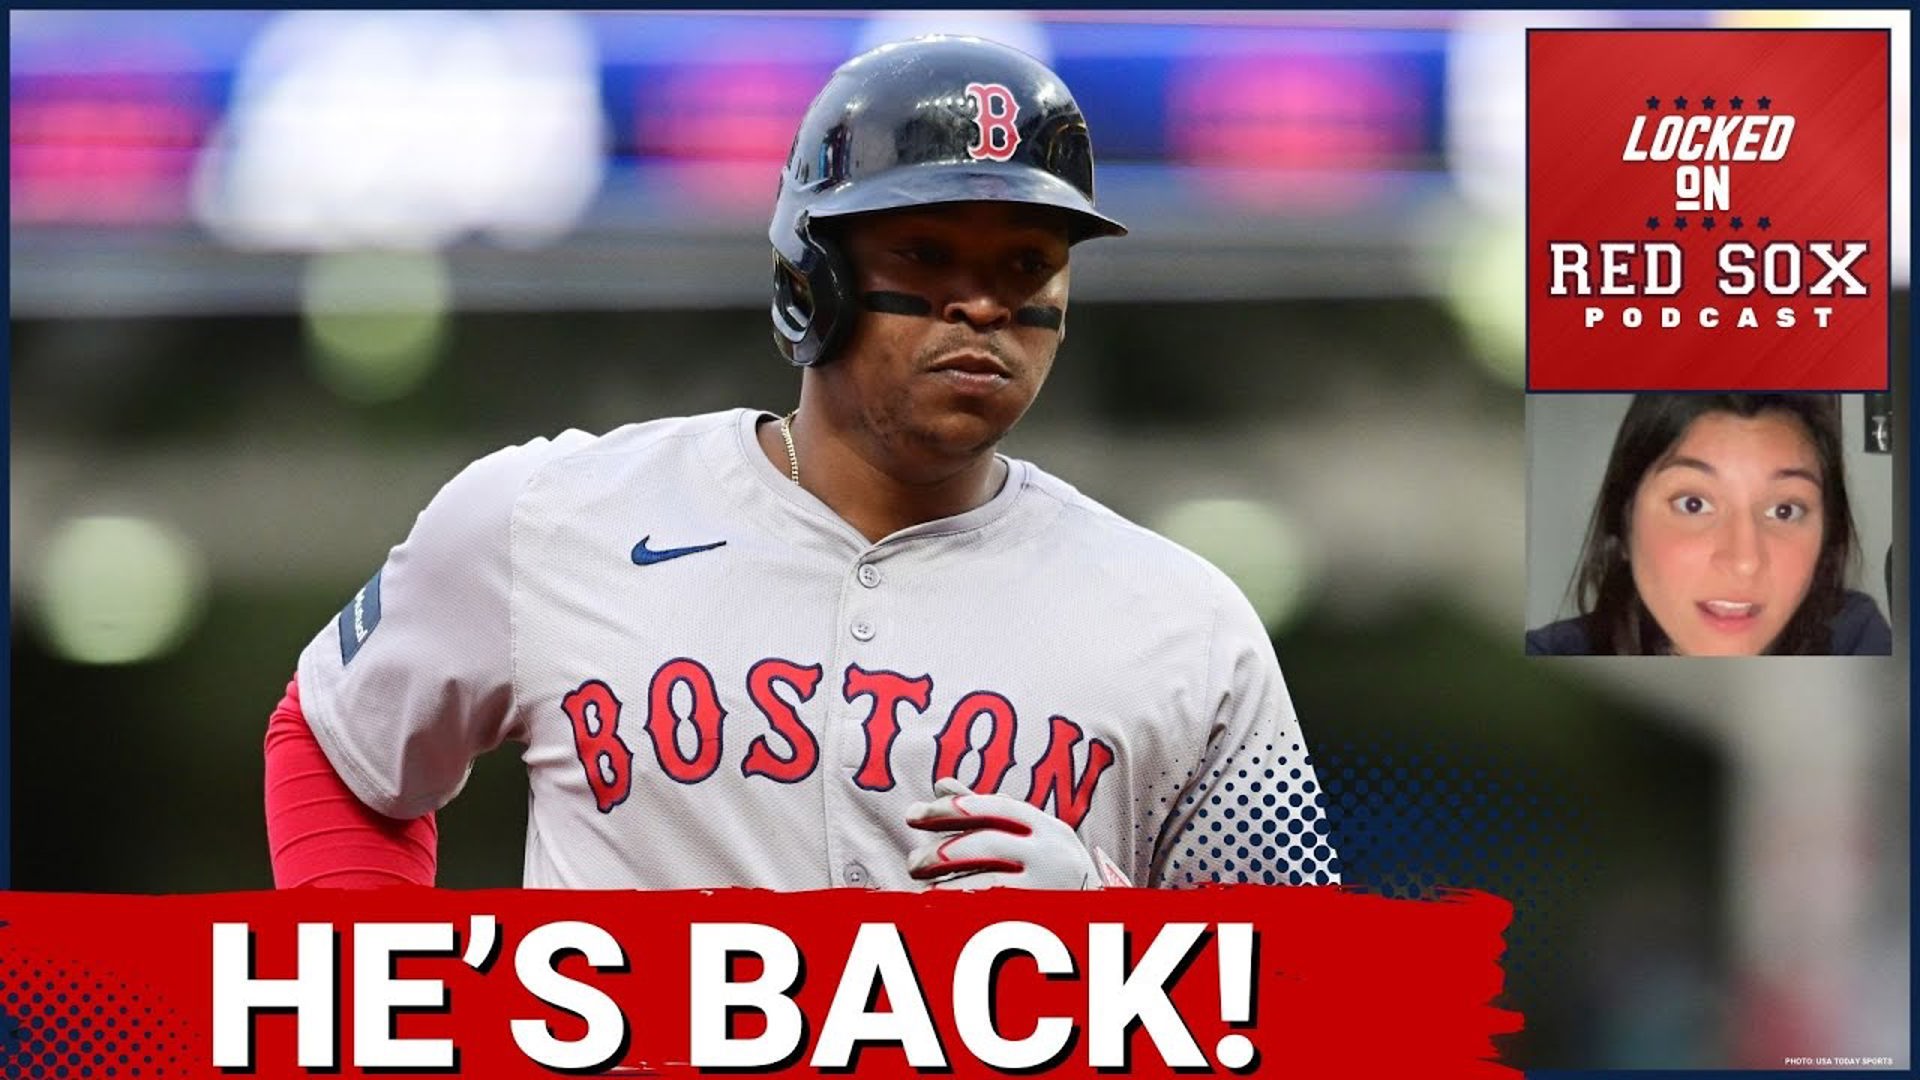 Rafael Devers returned to the lineup on Wednesday night as the Boston Red Sox defeated the Cleveland Guardians 8-0 on Wednesday night.